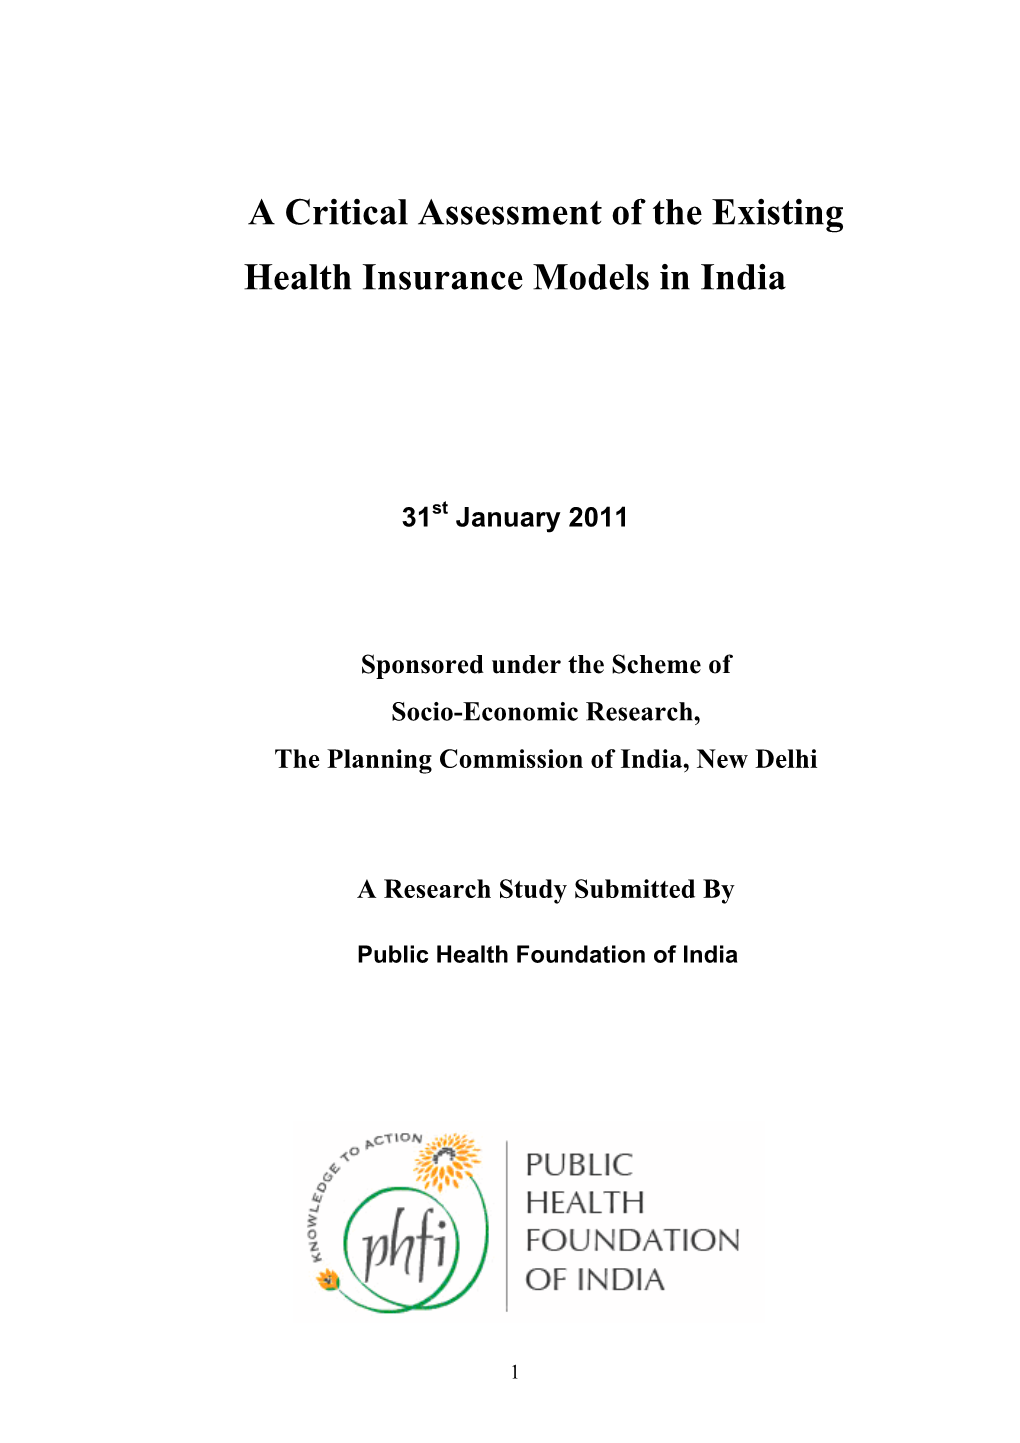 A Critical Assessment of the Existing Health Insurance Models in India